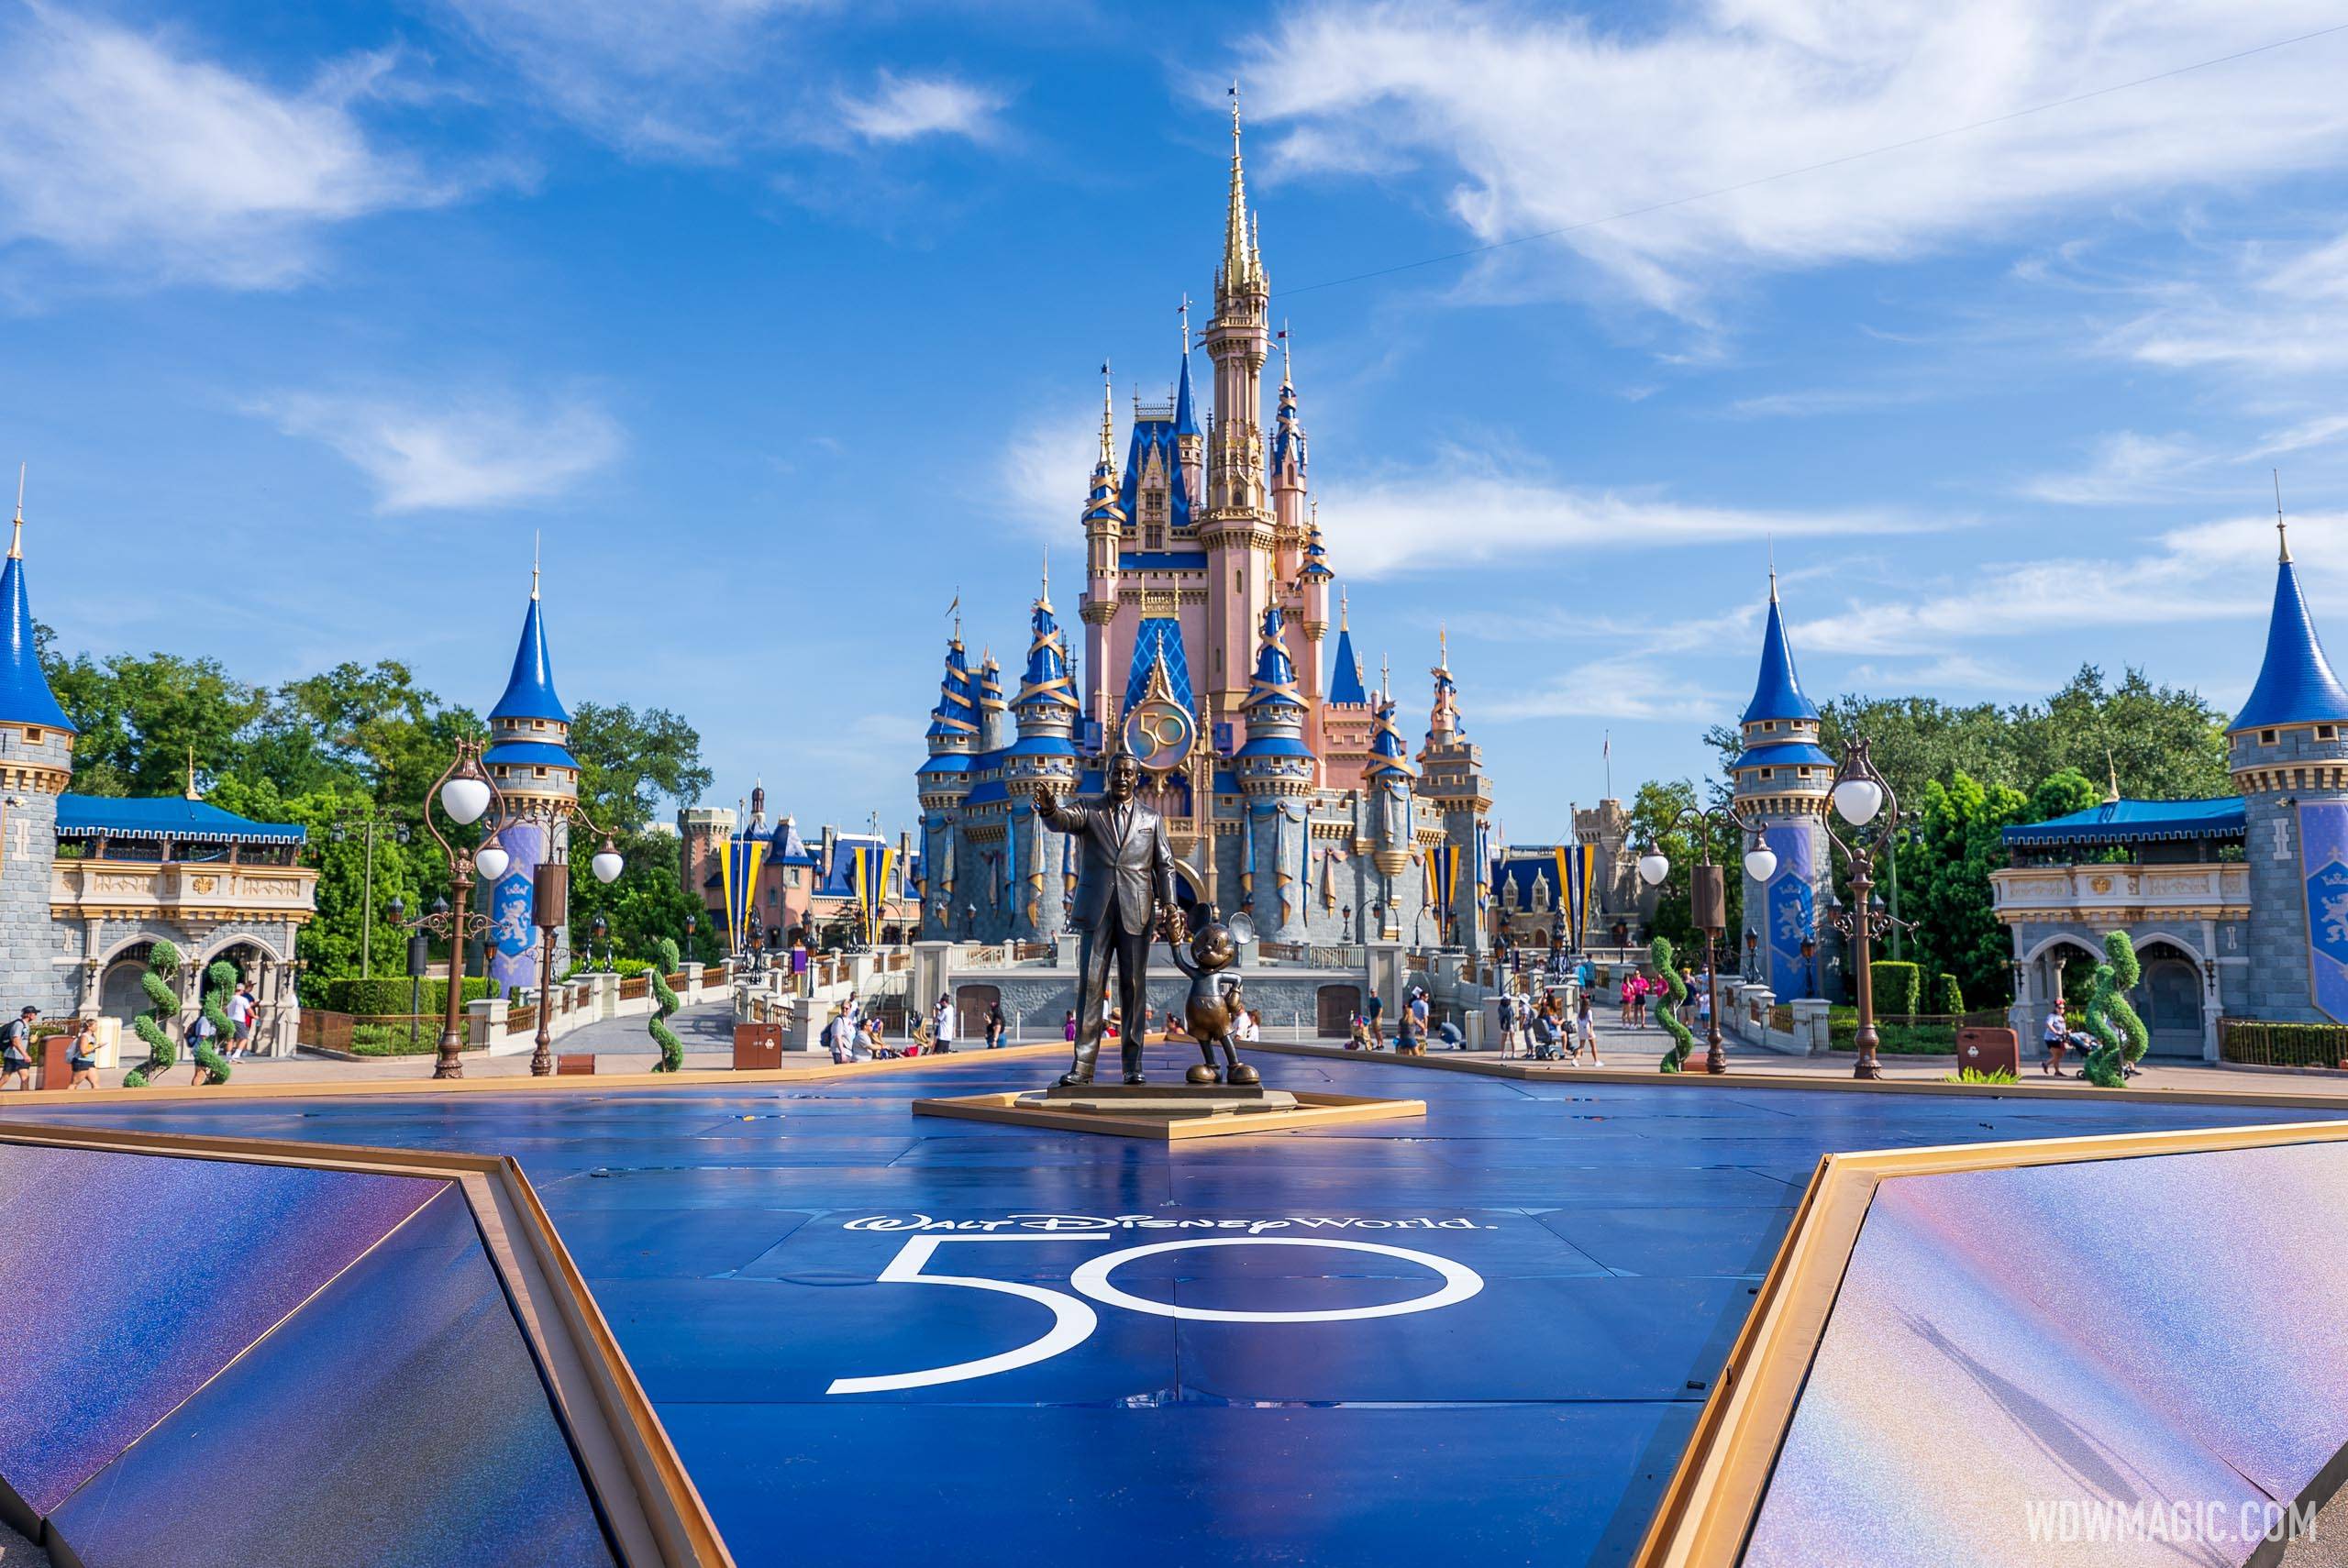 Stage installed at the Magic Kingdom for the Walt Disney World 50th anniversary TV special - 'The Most Magical Story on Earth: 50 Years of Walt Disney World'